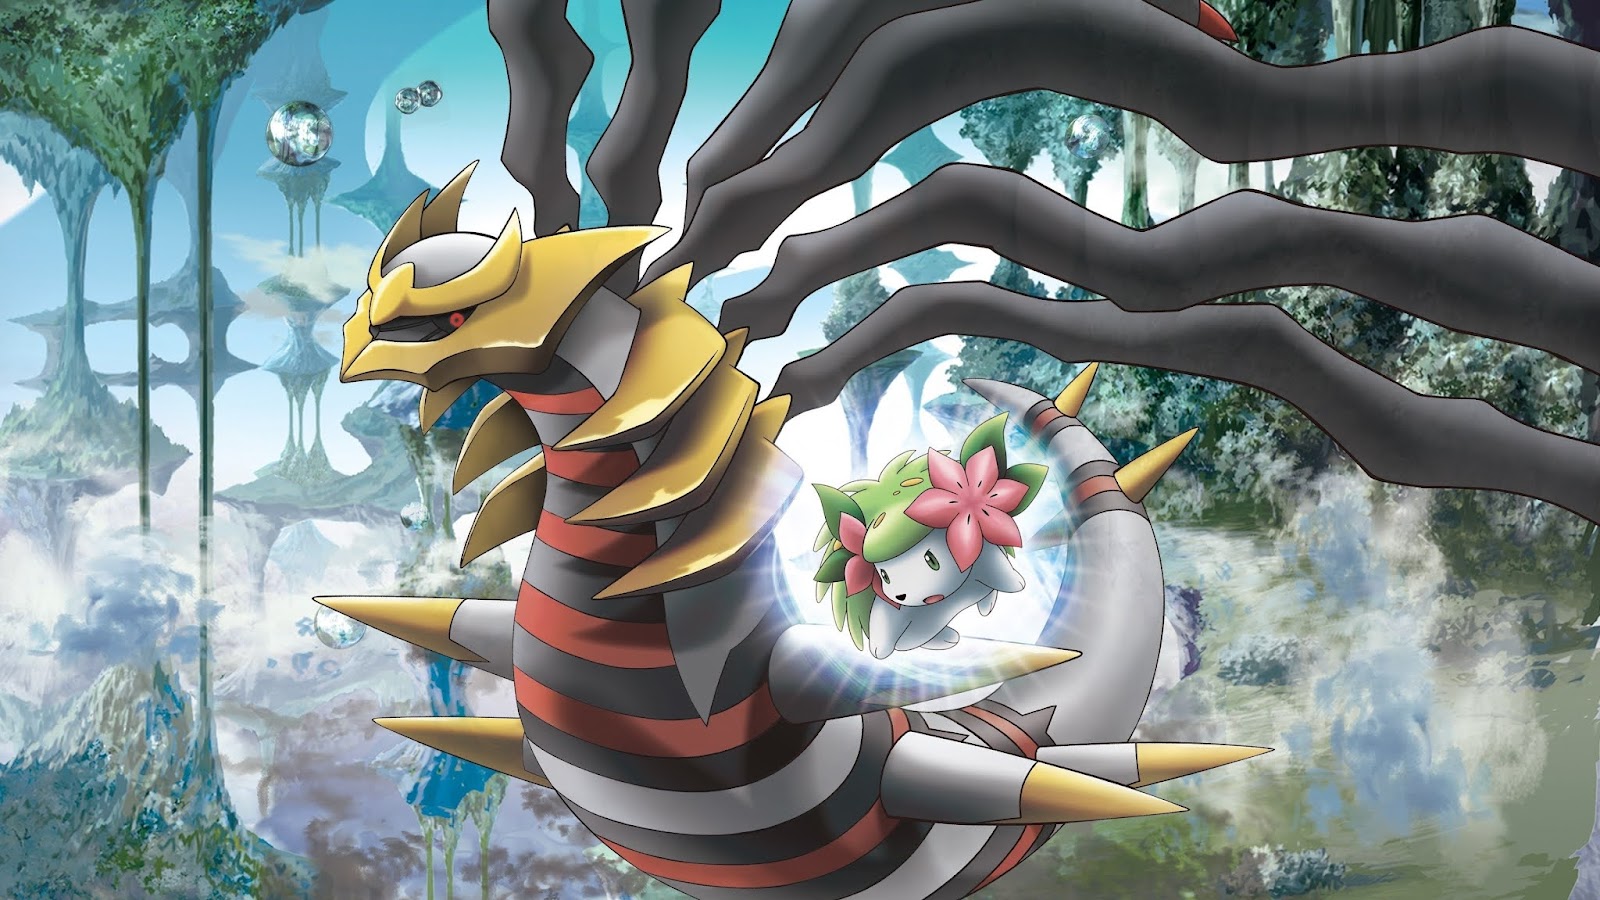 Dawn's Blue Hair in Pokemon: Giratina and the Sky Warrior - wide 9